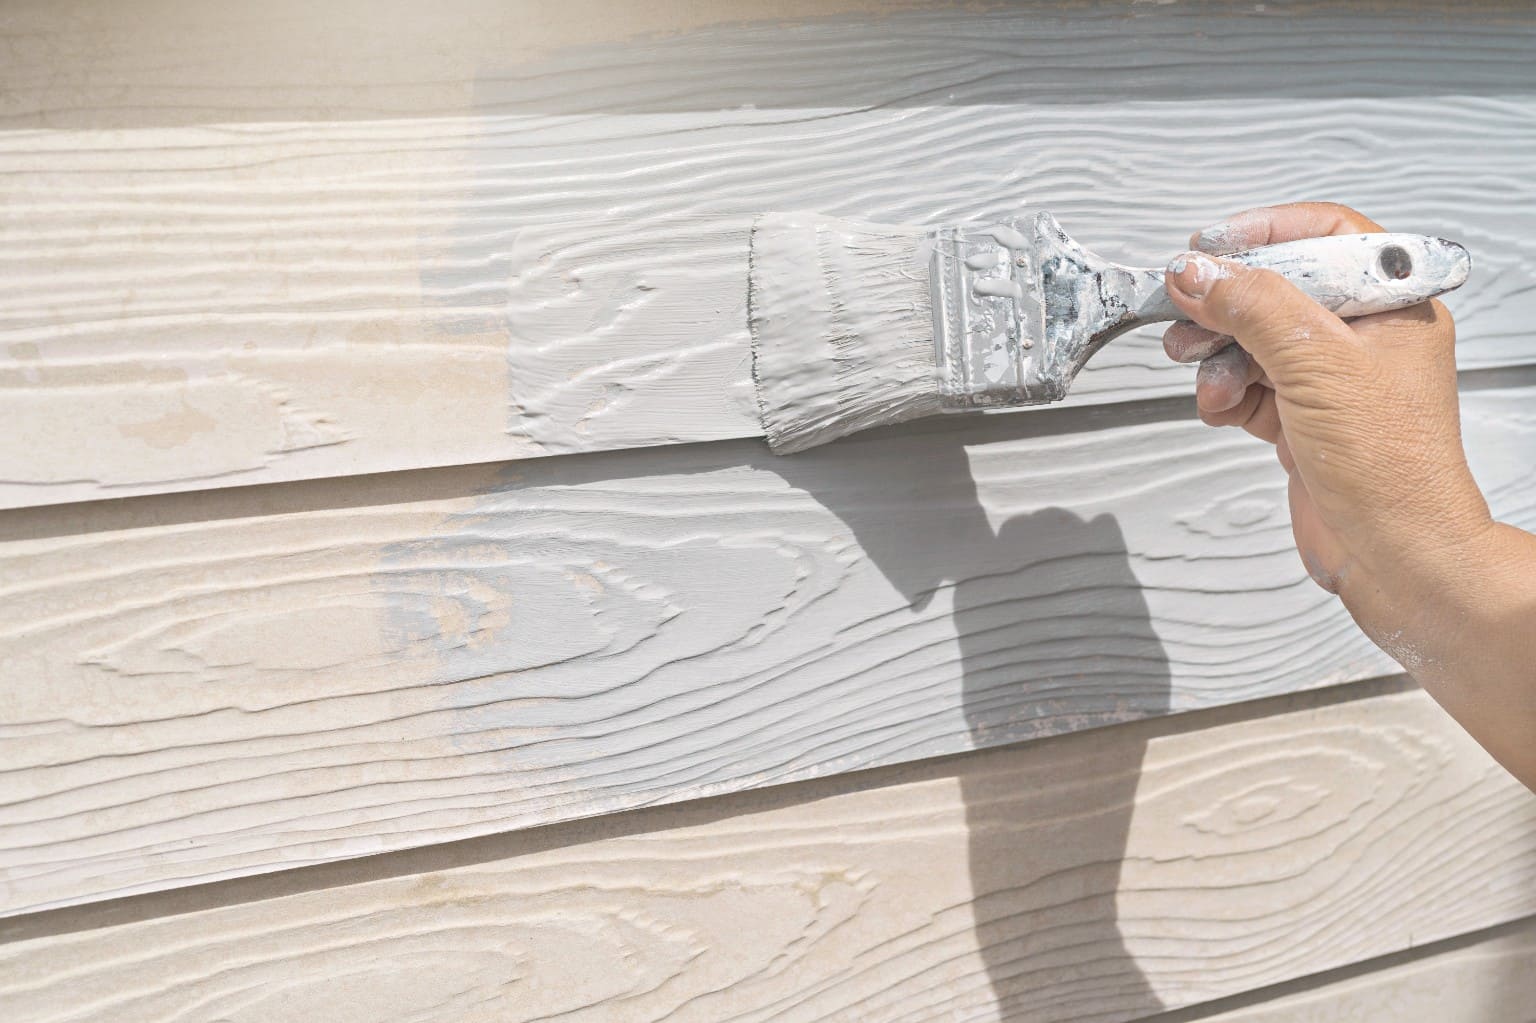 How to protect your siding from damage?